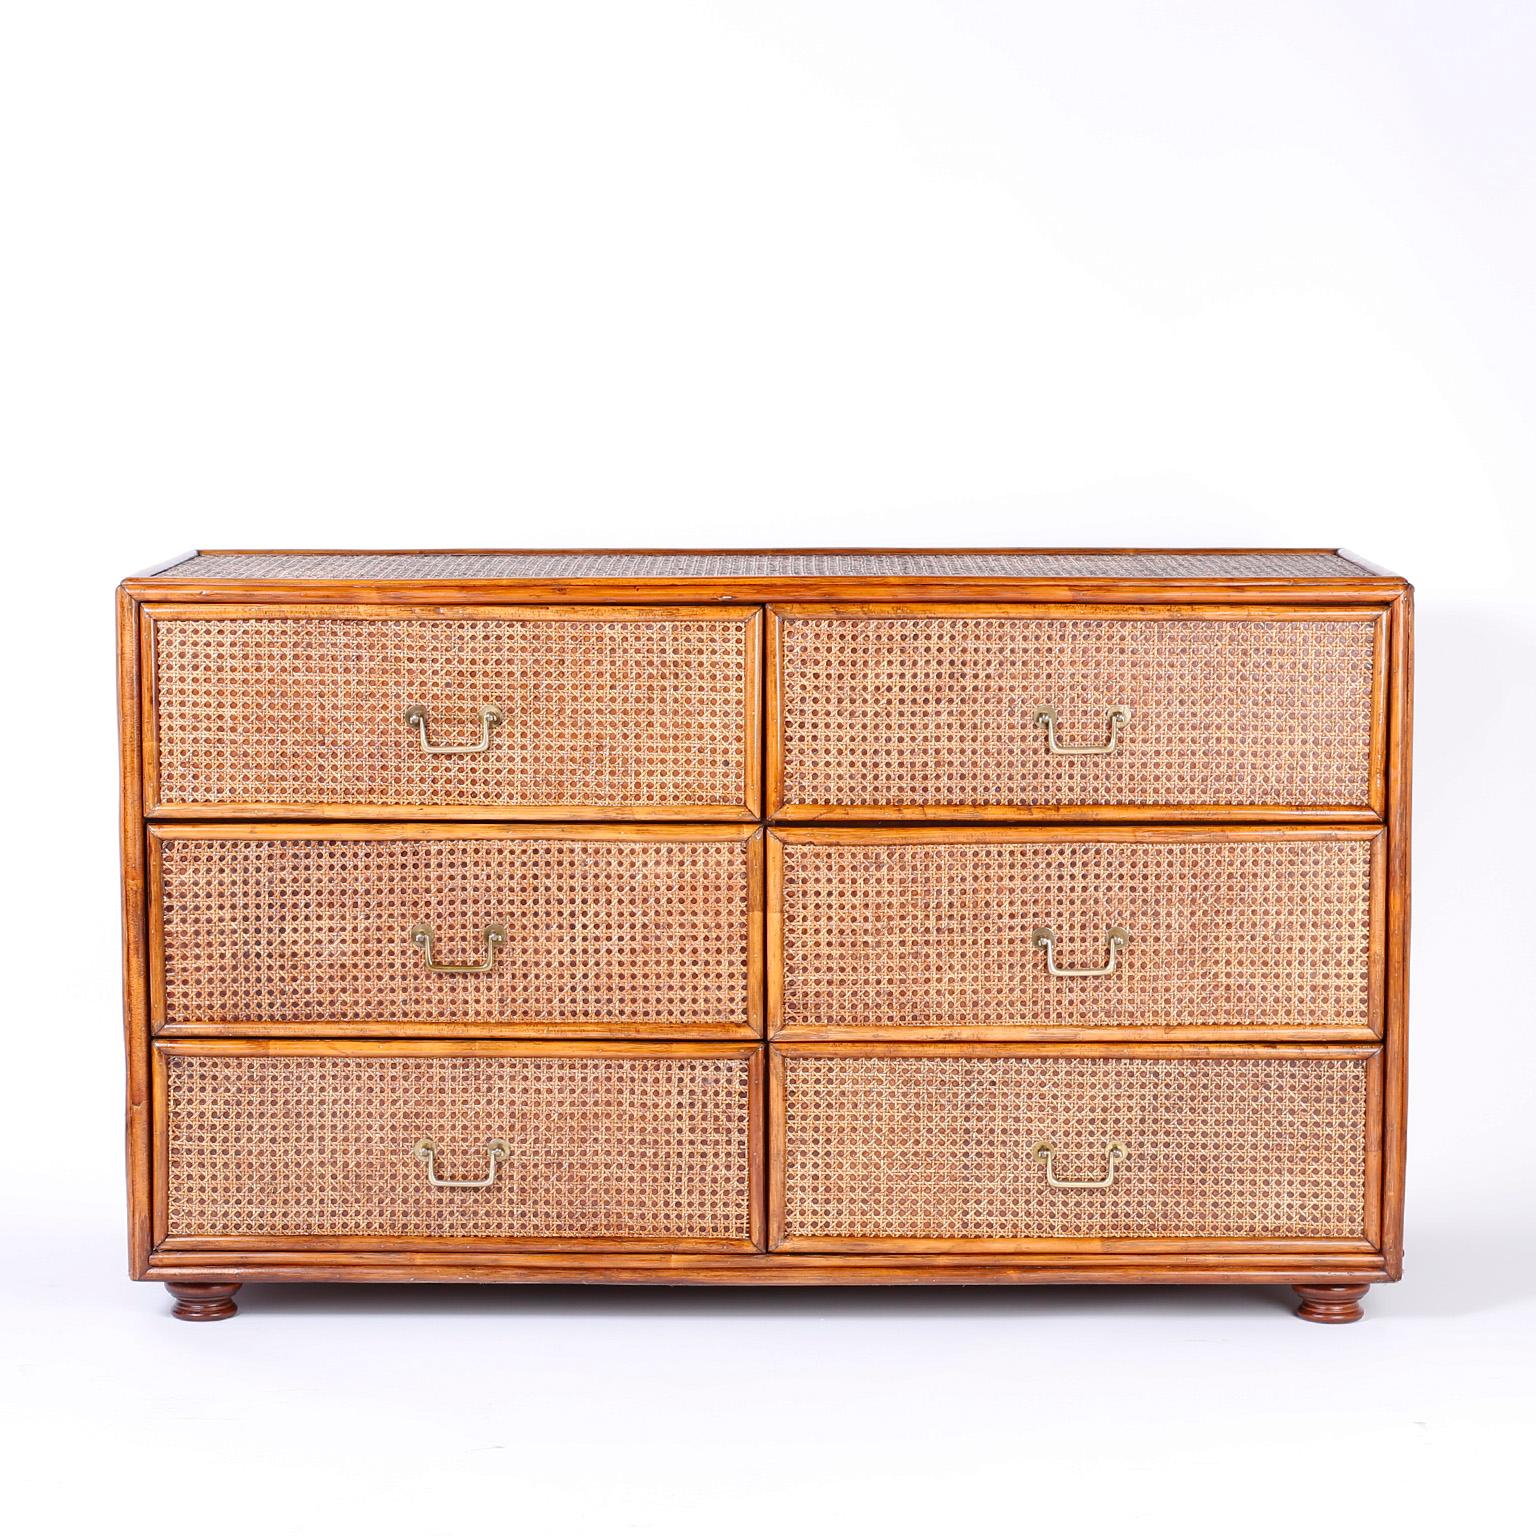 Midcentury British Colonial style six-drawer chest, dresser or credenza with a rattan frame over a caned background with brass hardware, turned feet, and a casual, elegant form.